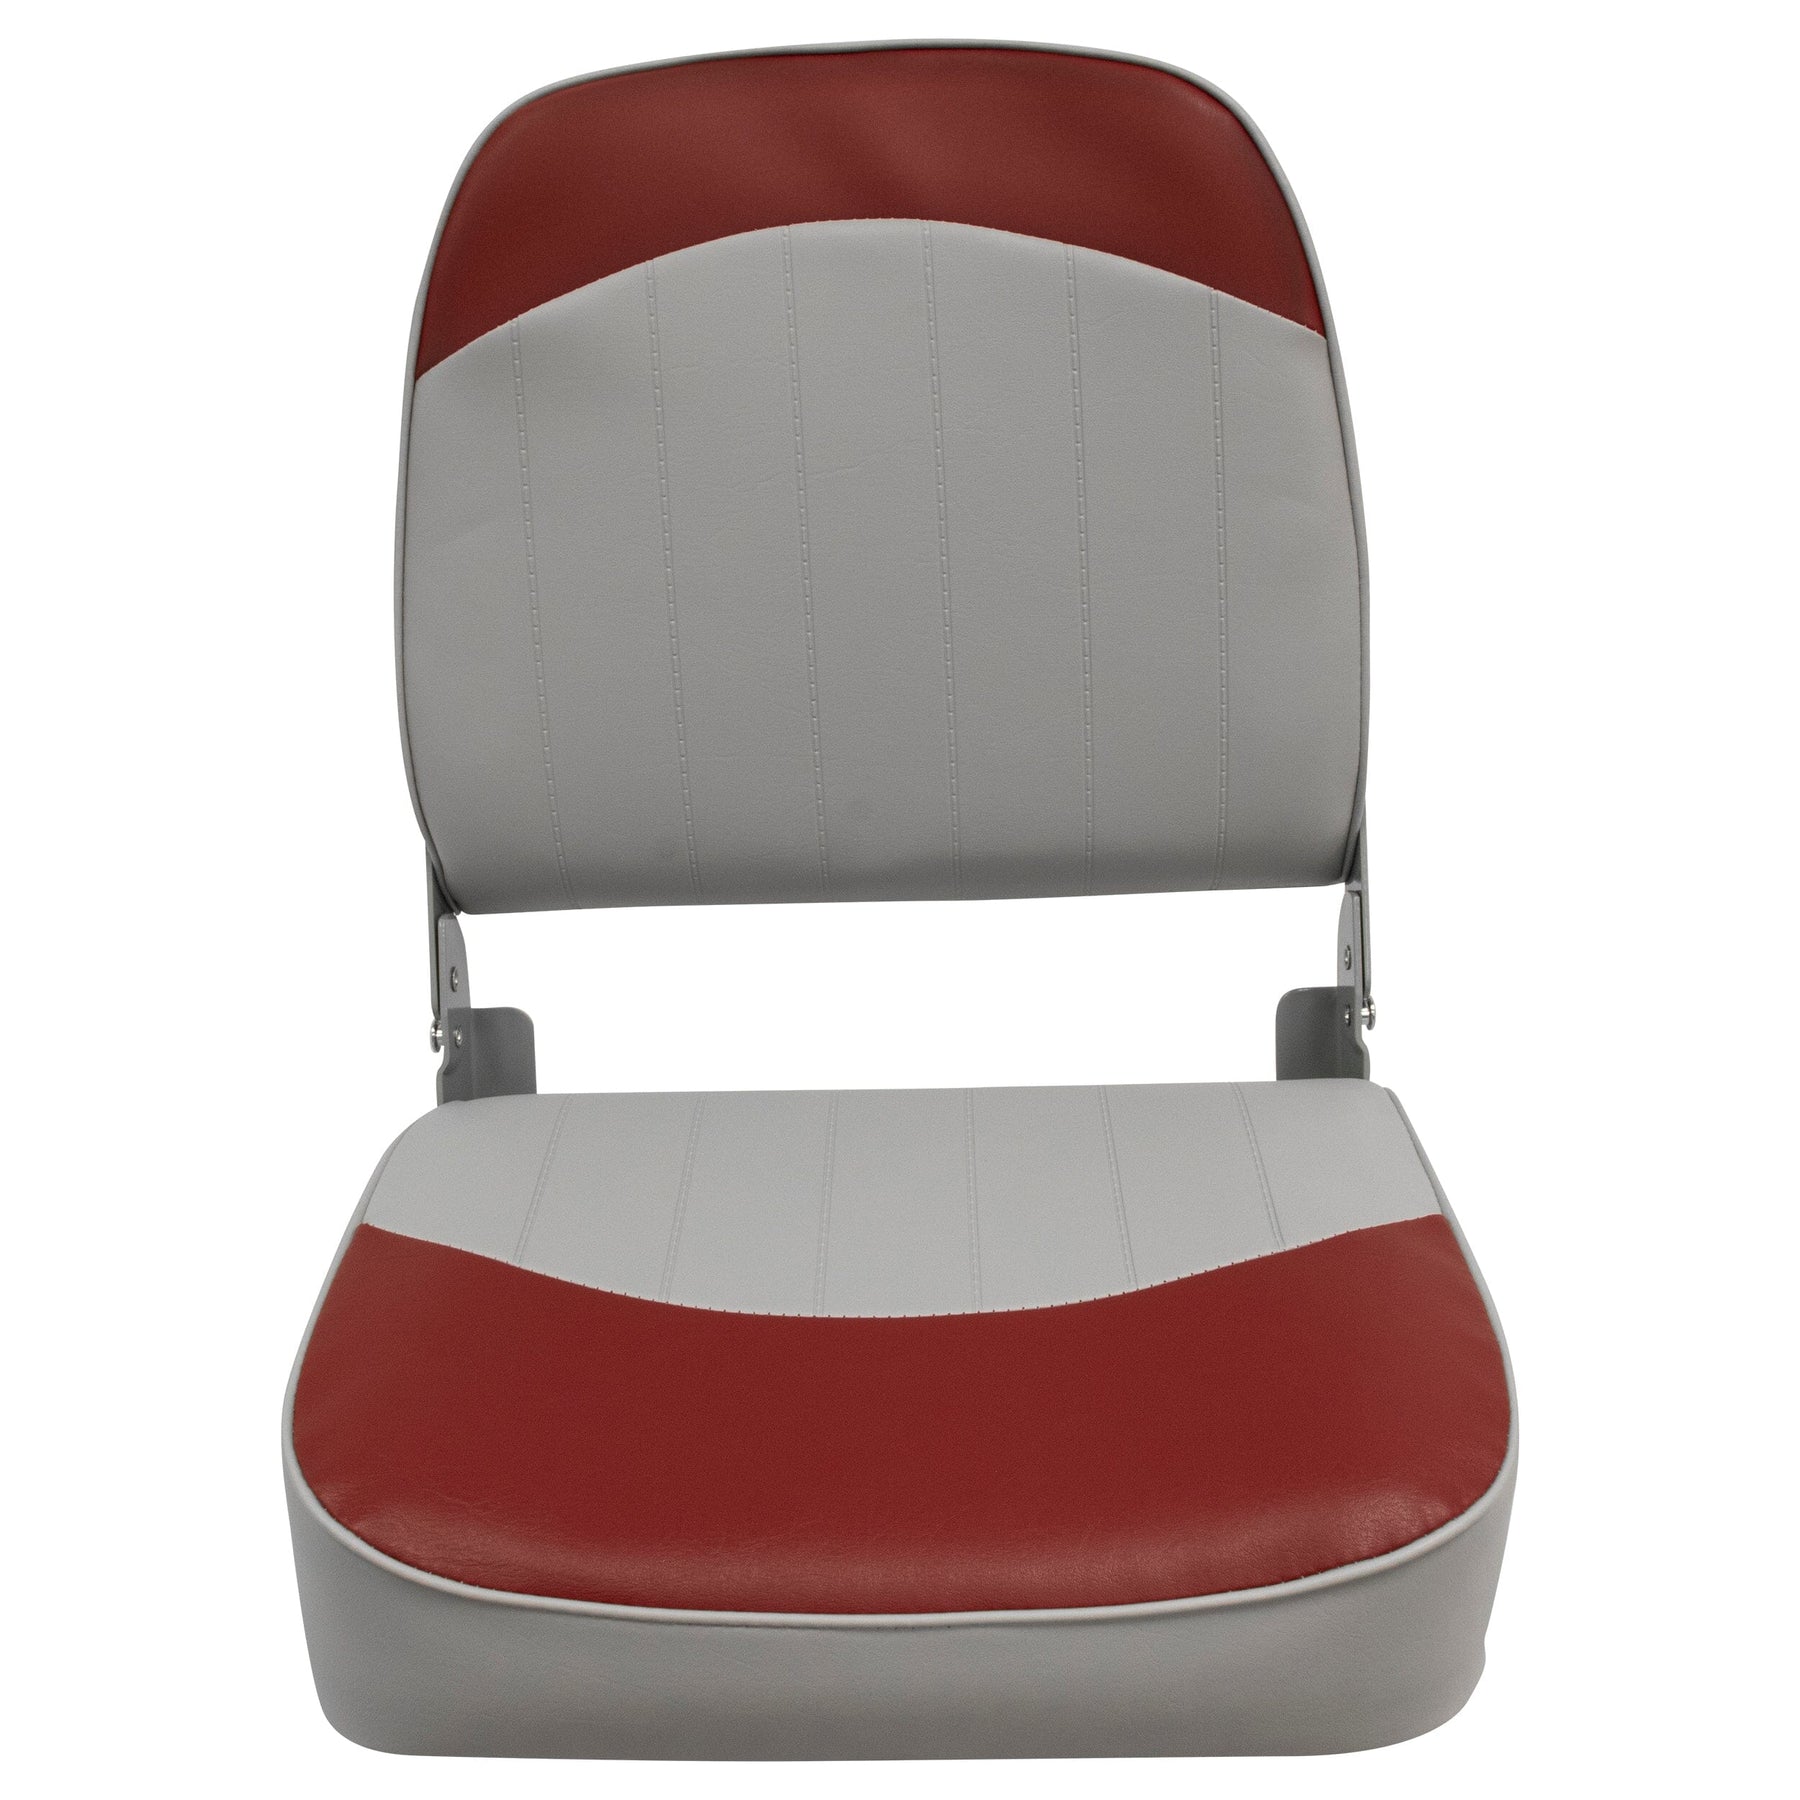 Wise low back economy seat - red, 8wd734pls-712